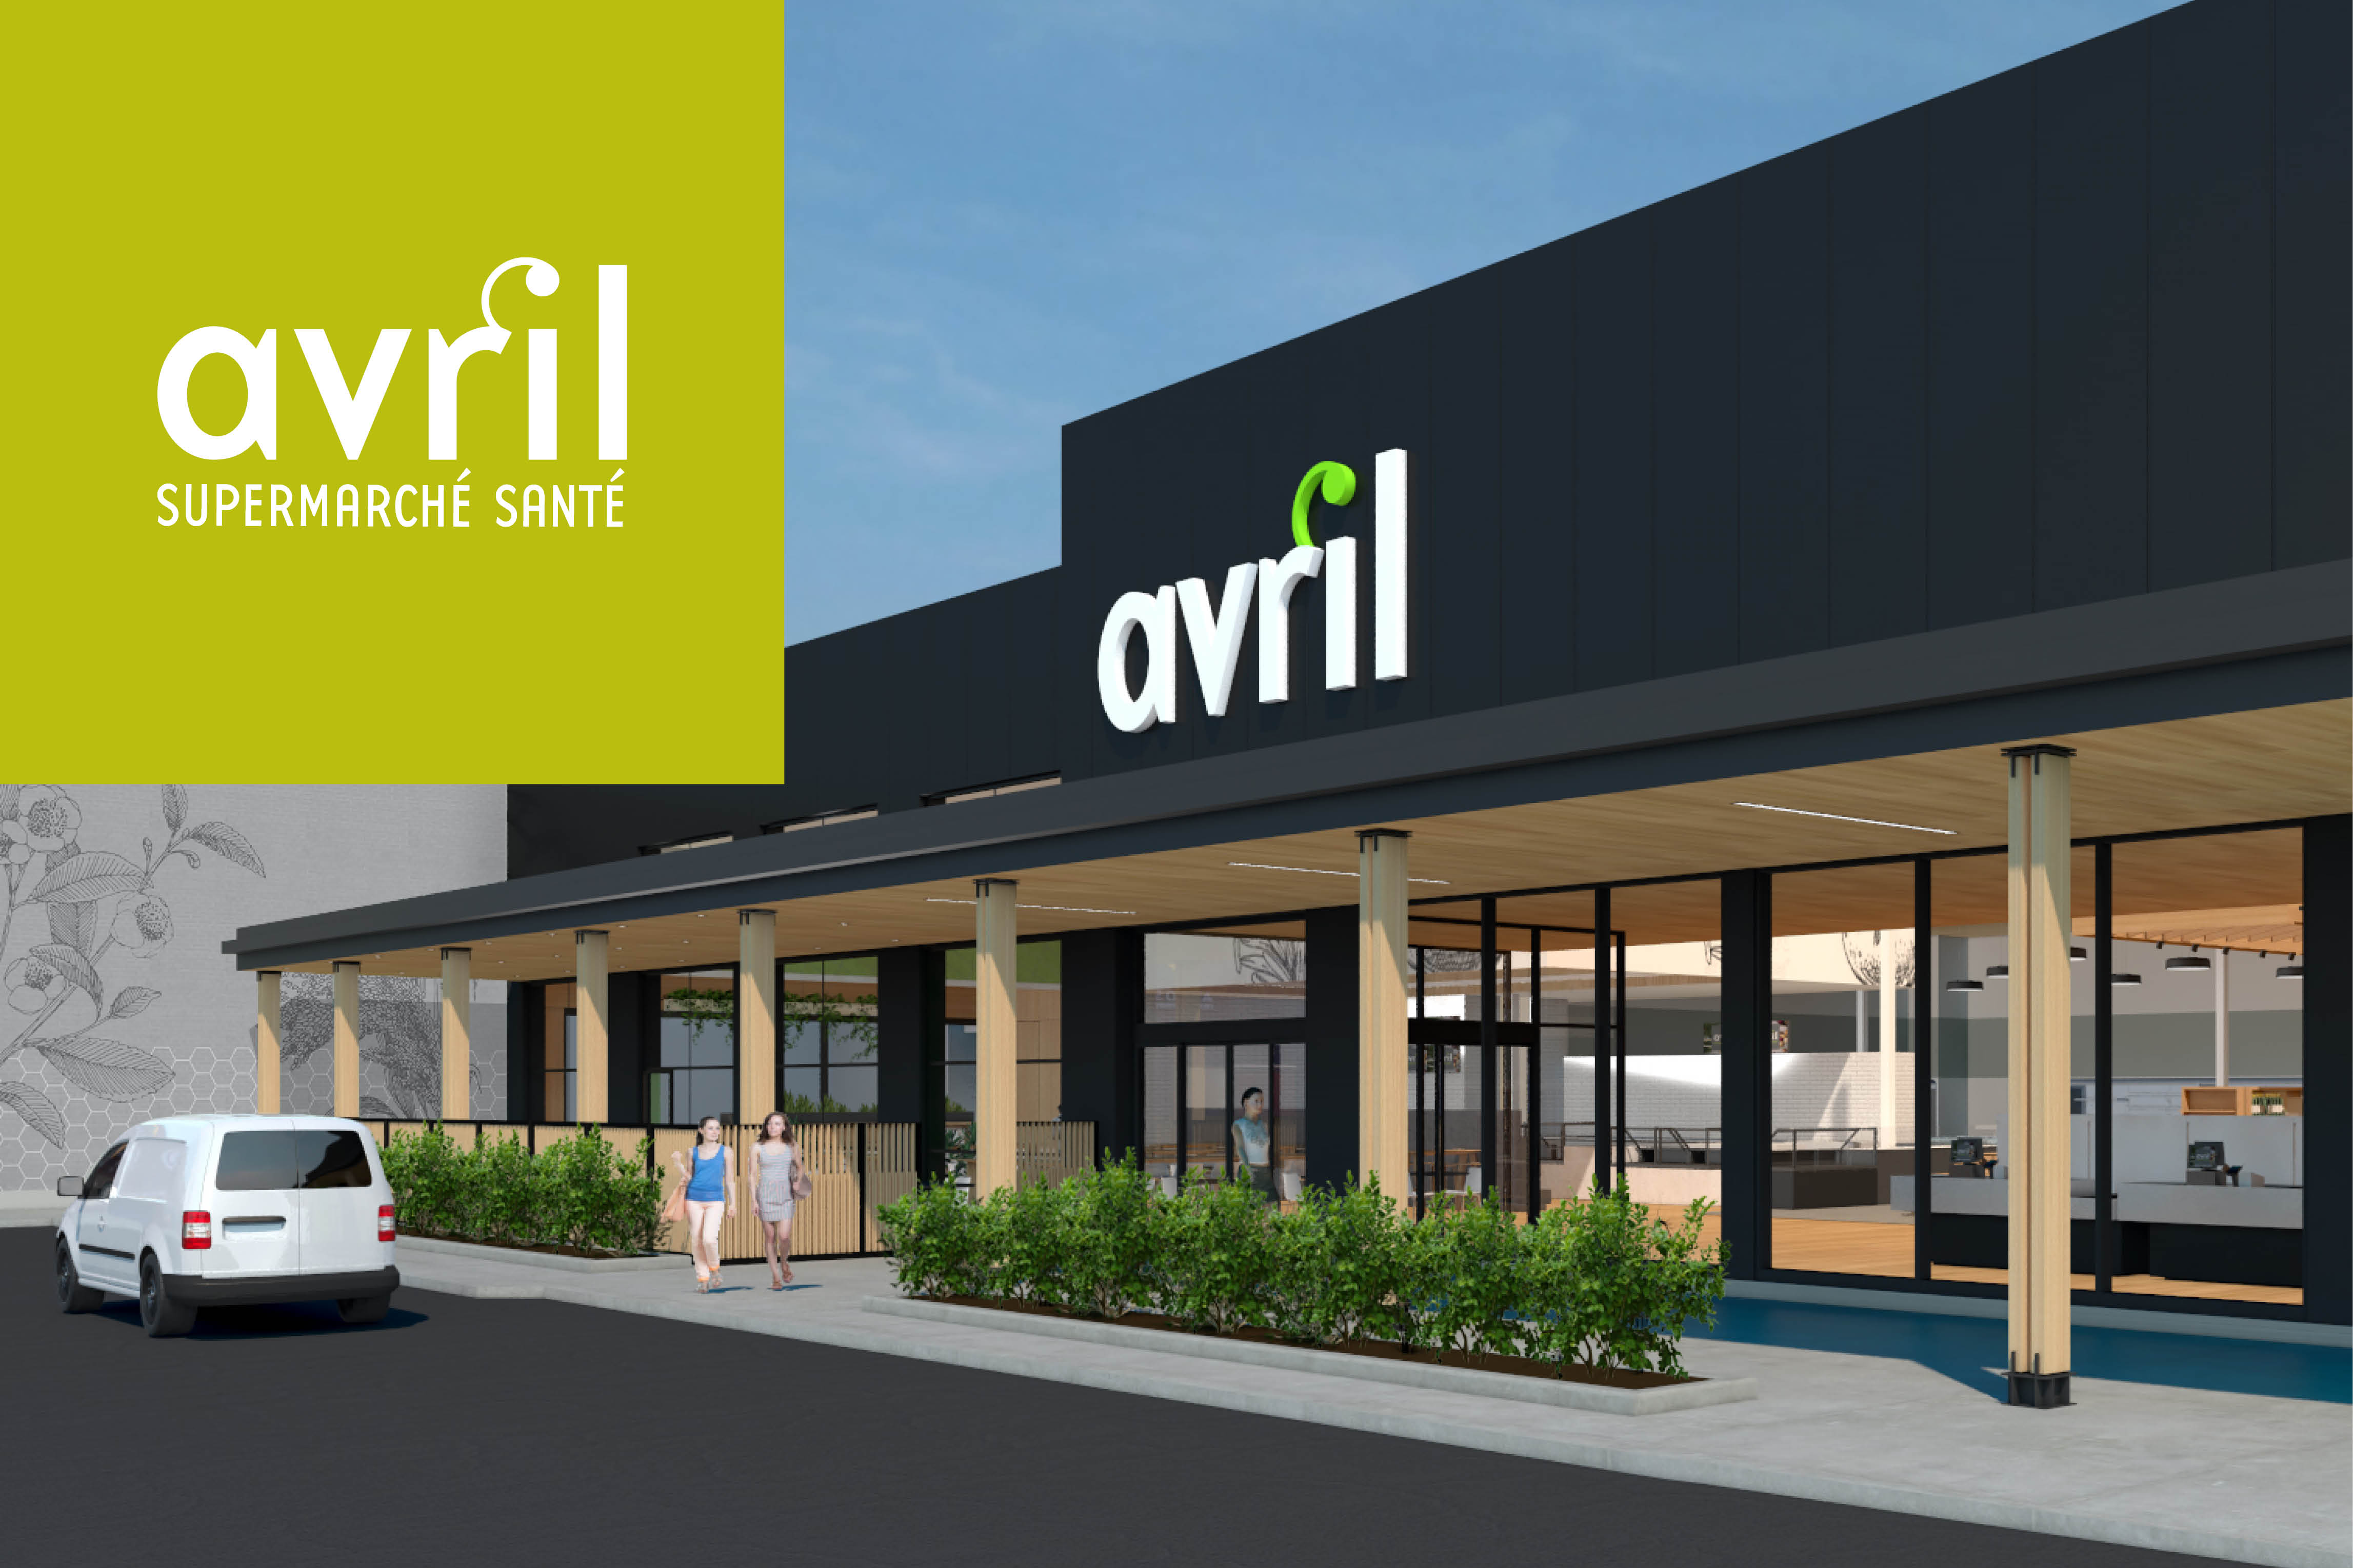 Coming This Fall: New Avril Branch at Galeries Rive Nord